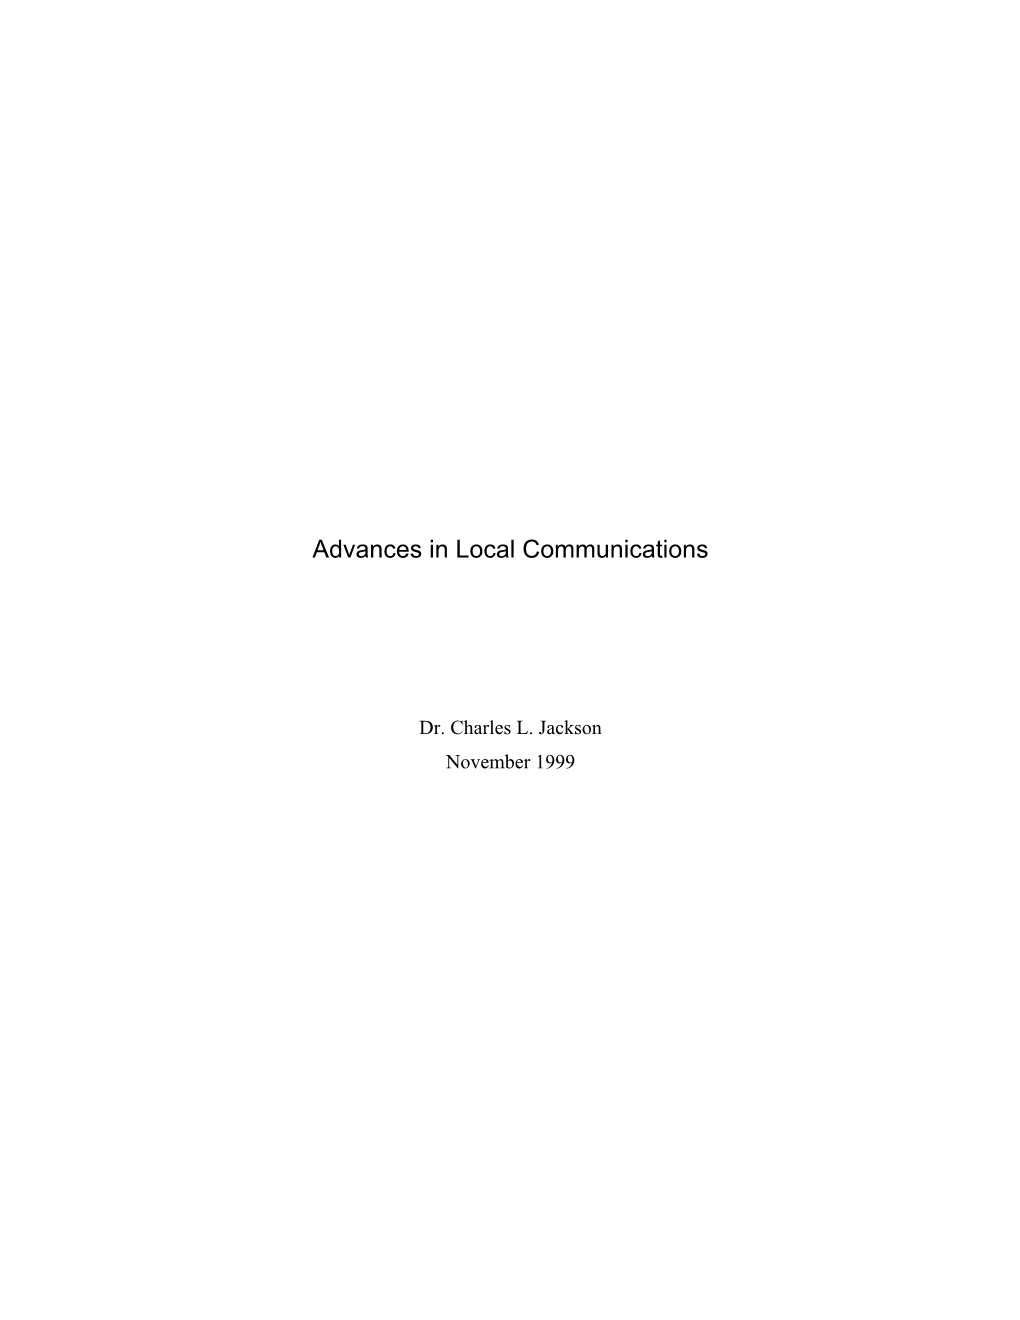 "Advances in Local Communications" by Dr. Charles L. Jackson